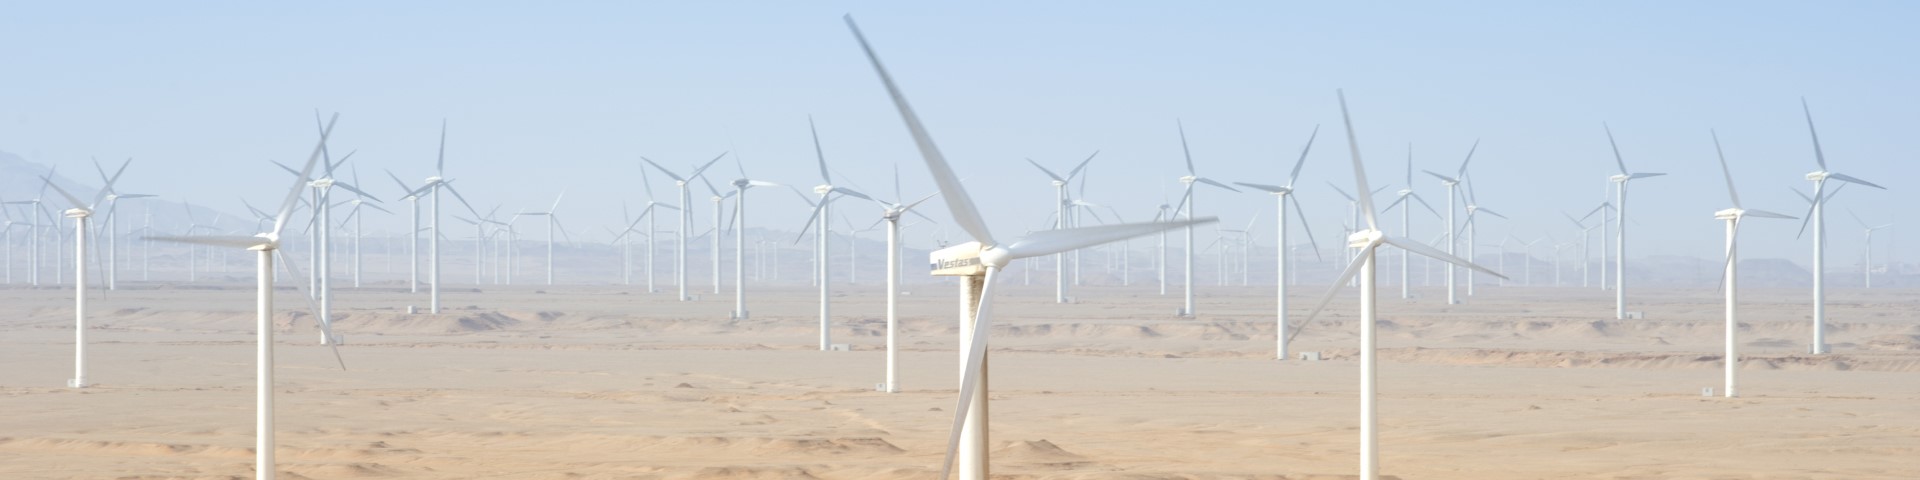 A vast array of wind turbines standing in the desert, harnessing the power of wind to generate clean and renewable energy.